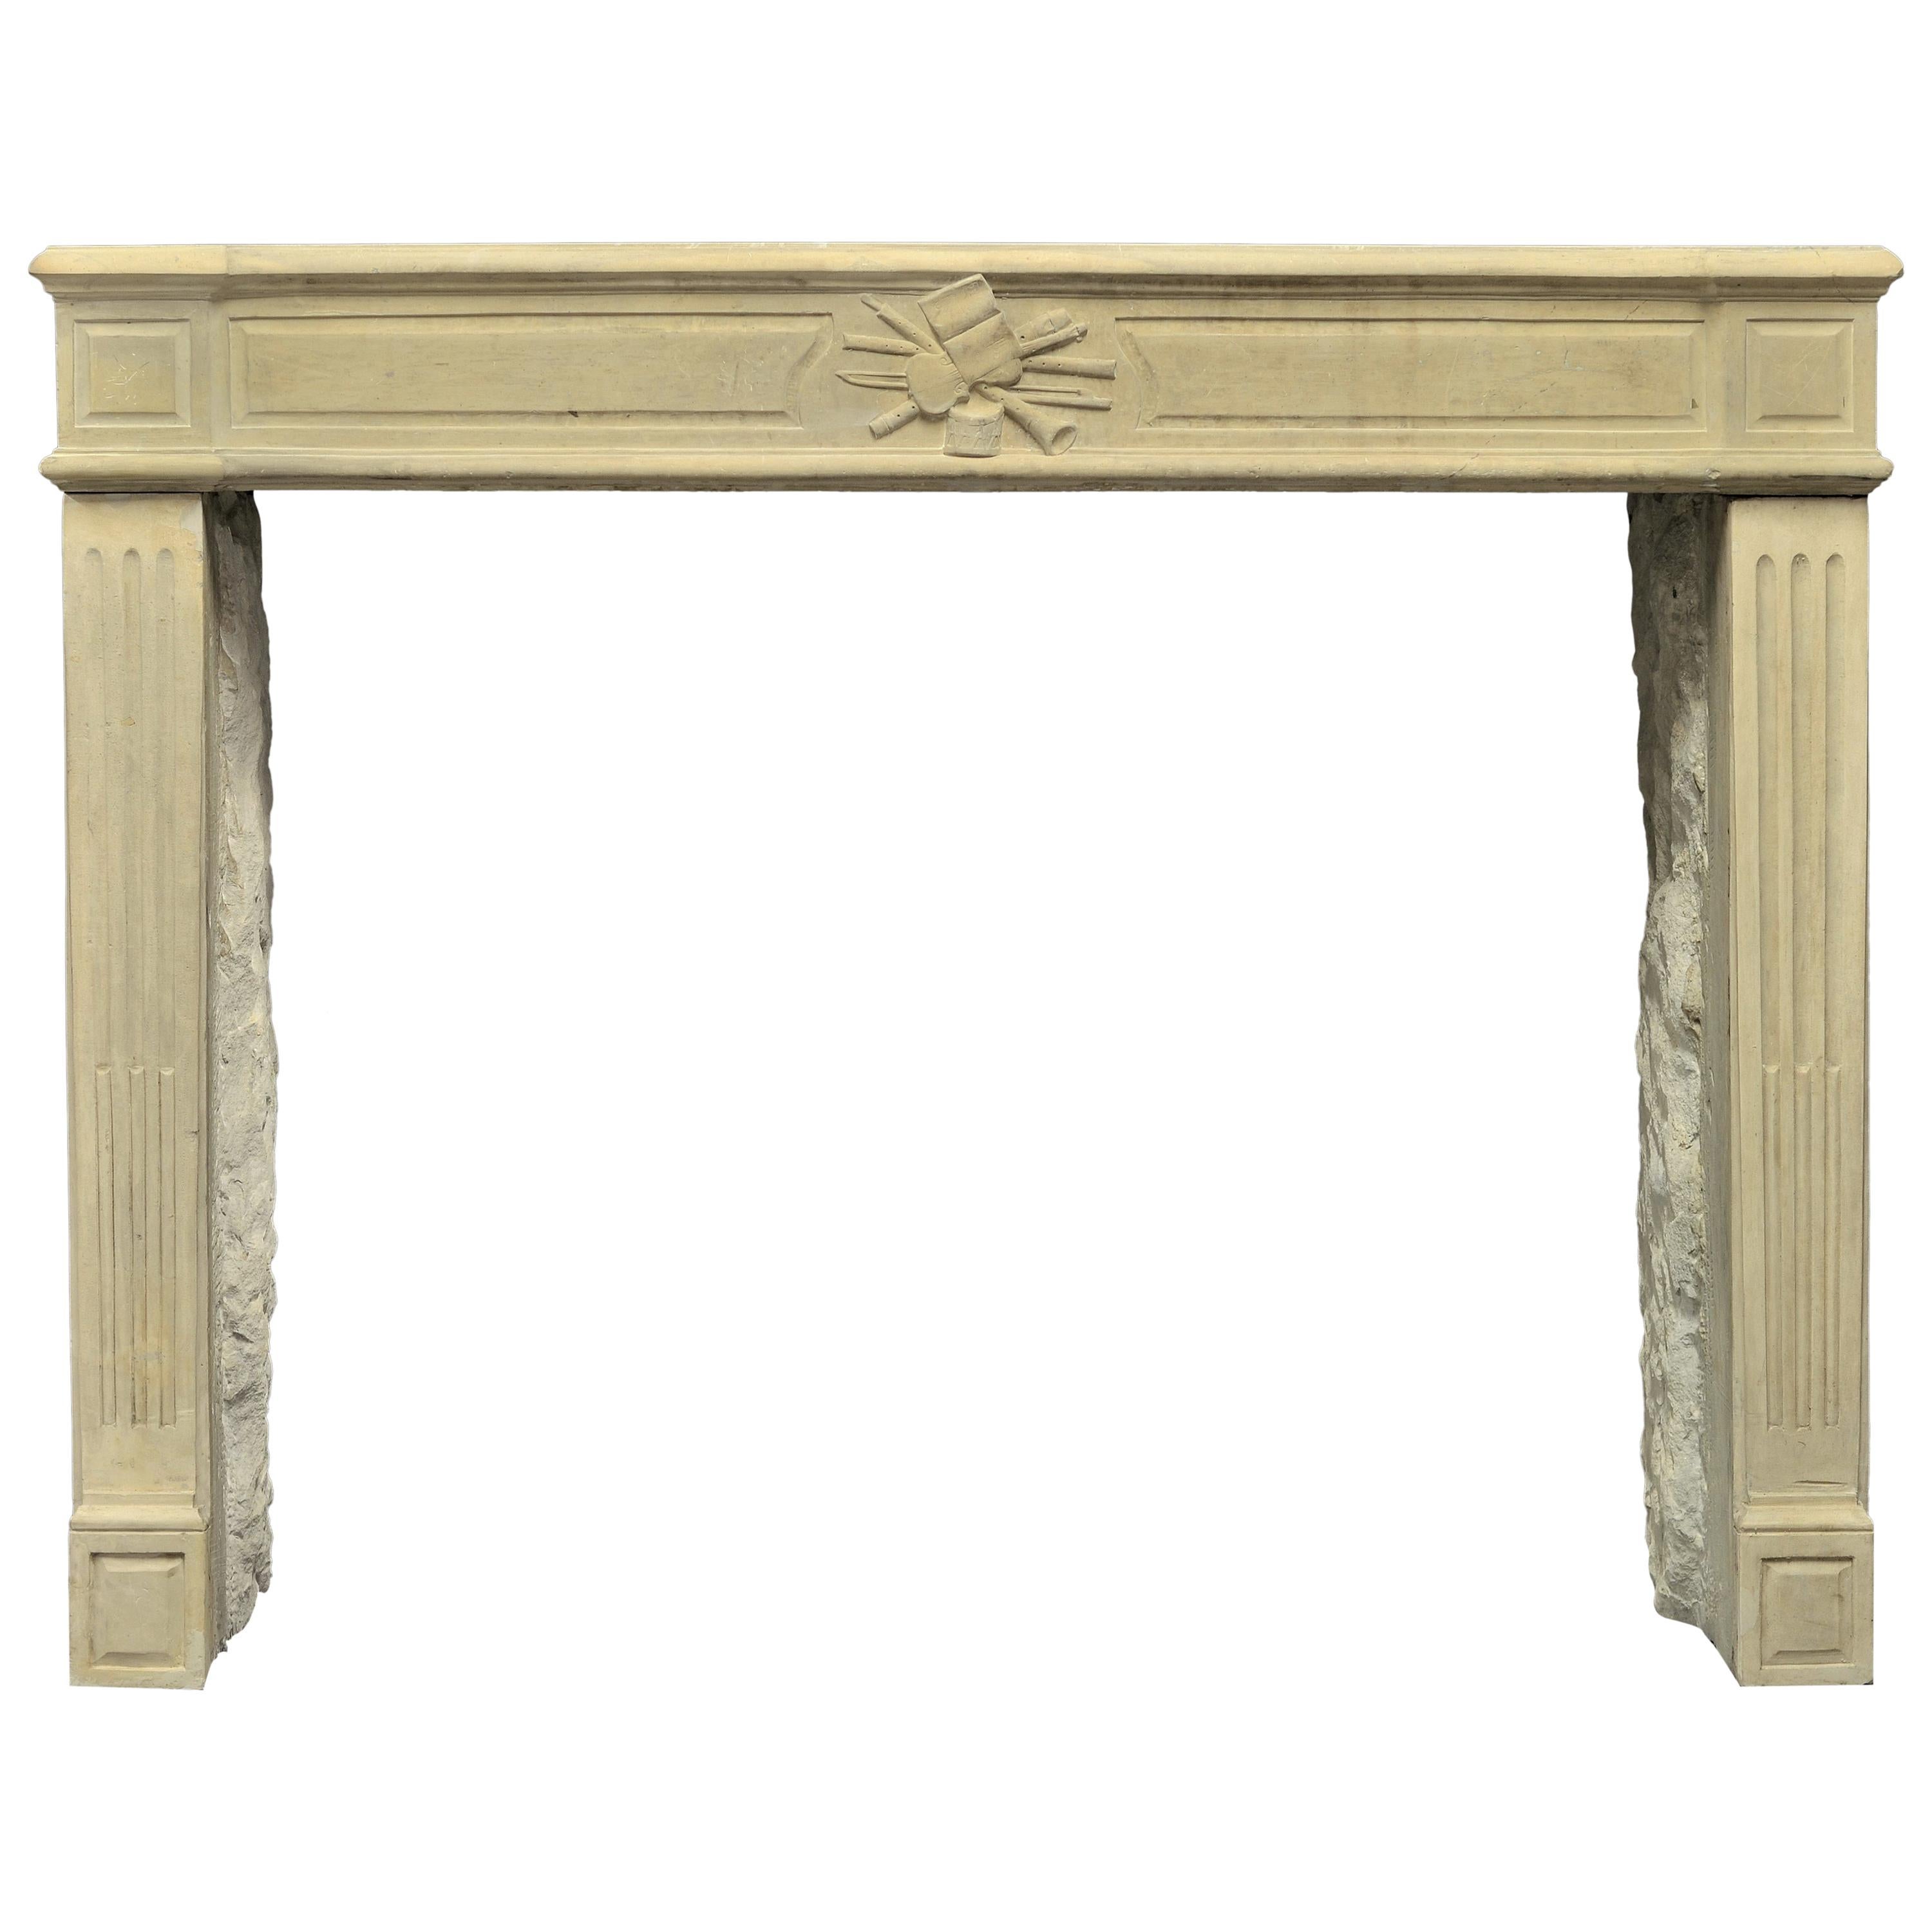 Lovely French Antique Louis XVI Fireplace Mantel